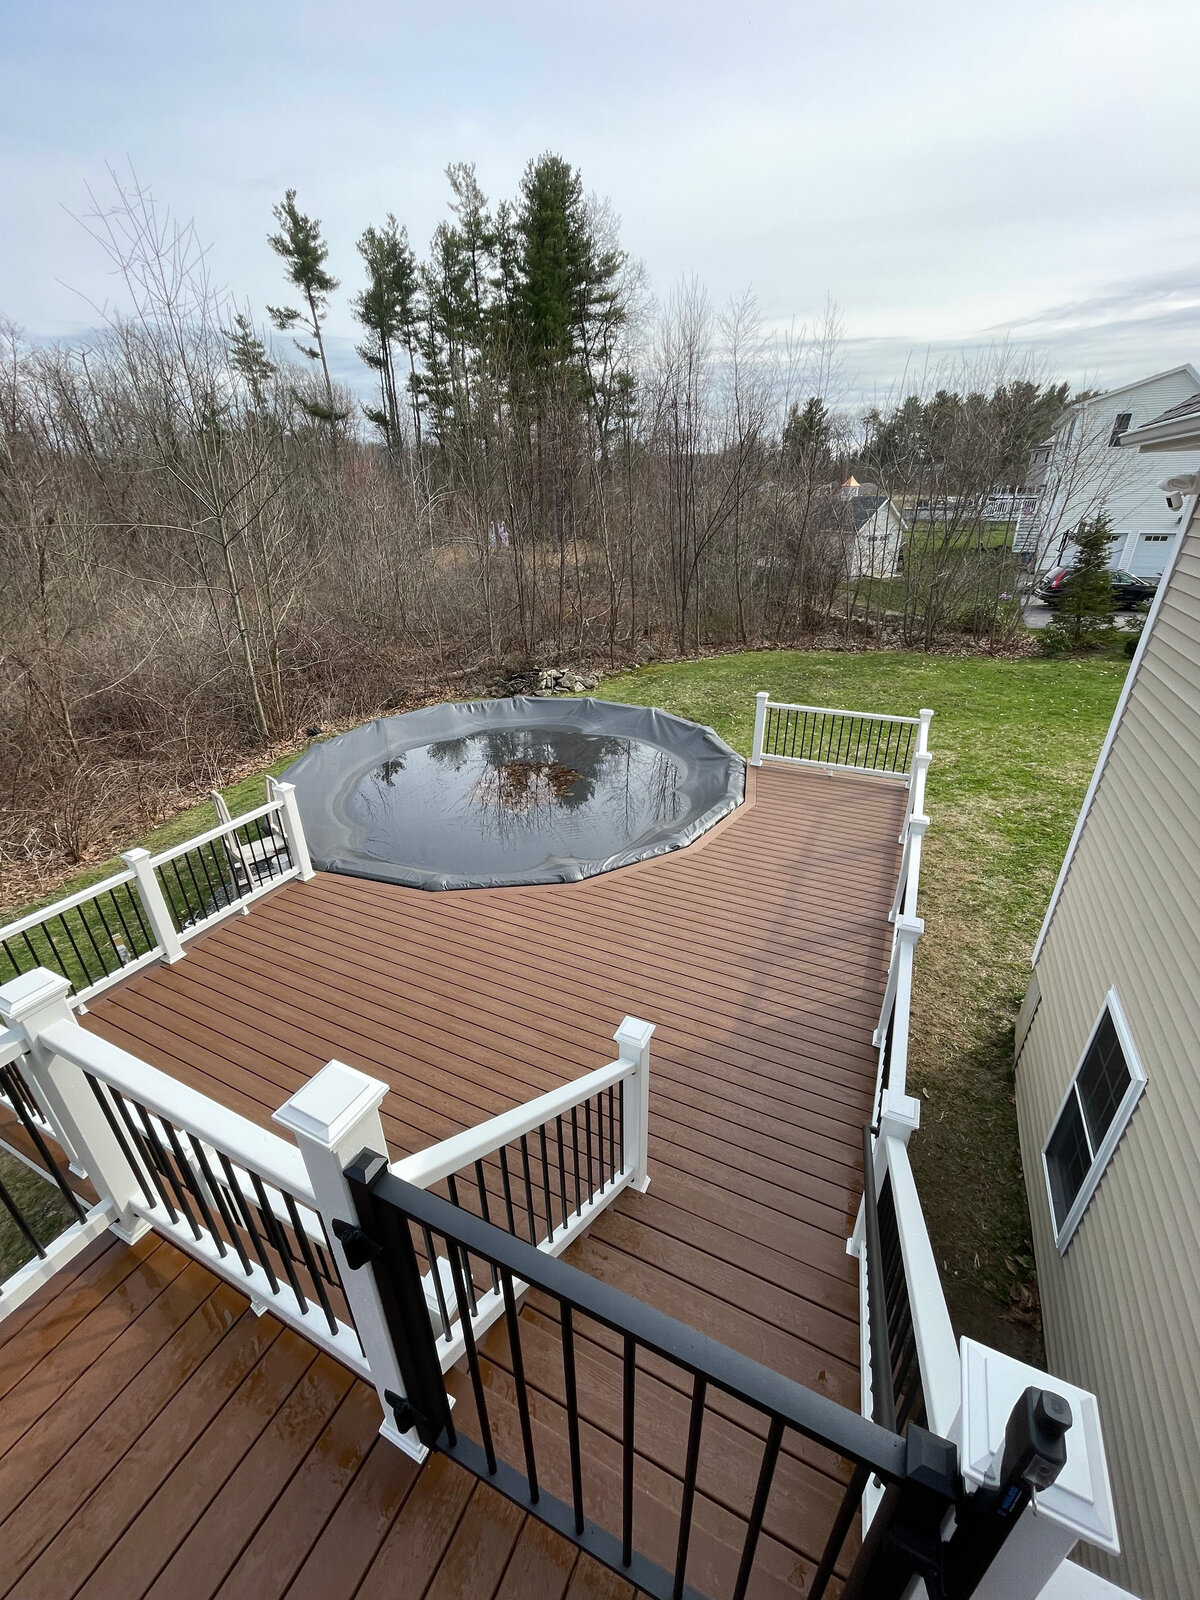 A view down onto a pool deck of brown composite around an above ground pool with a second tier